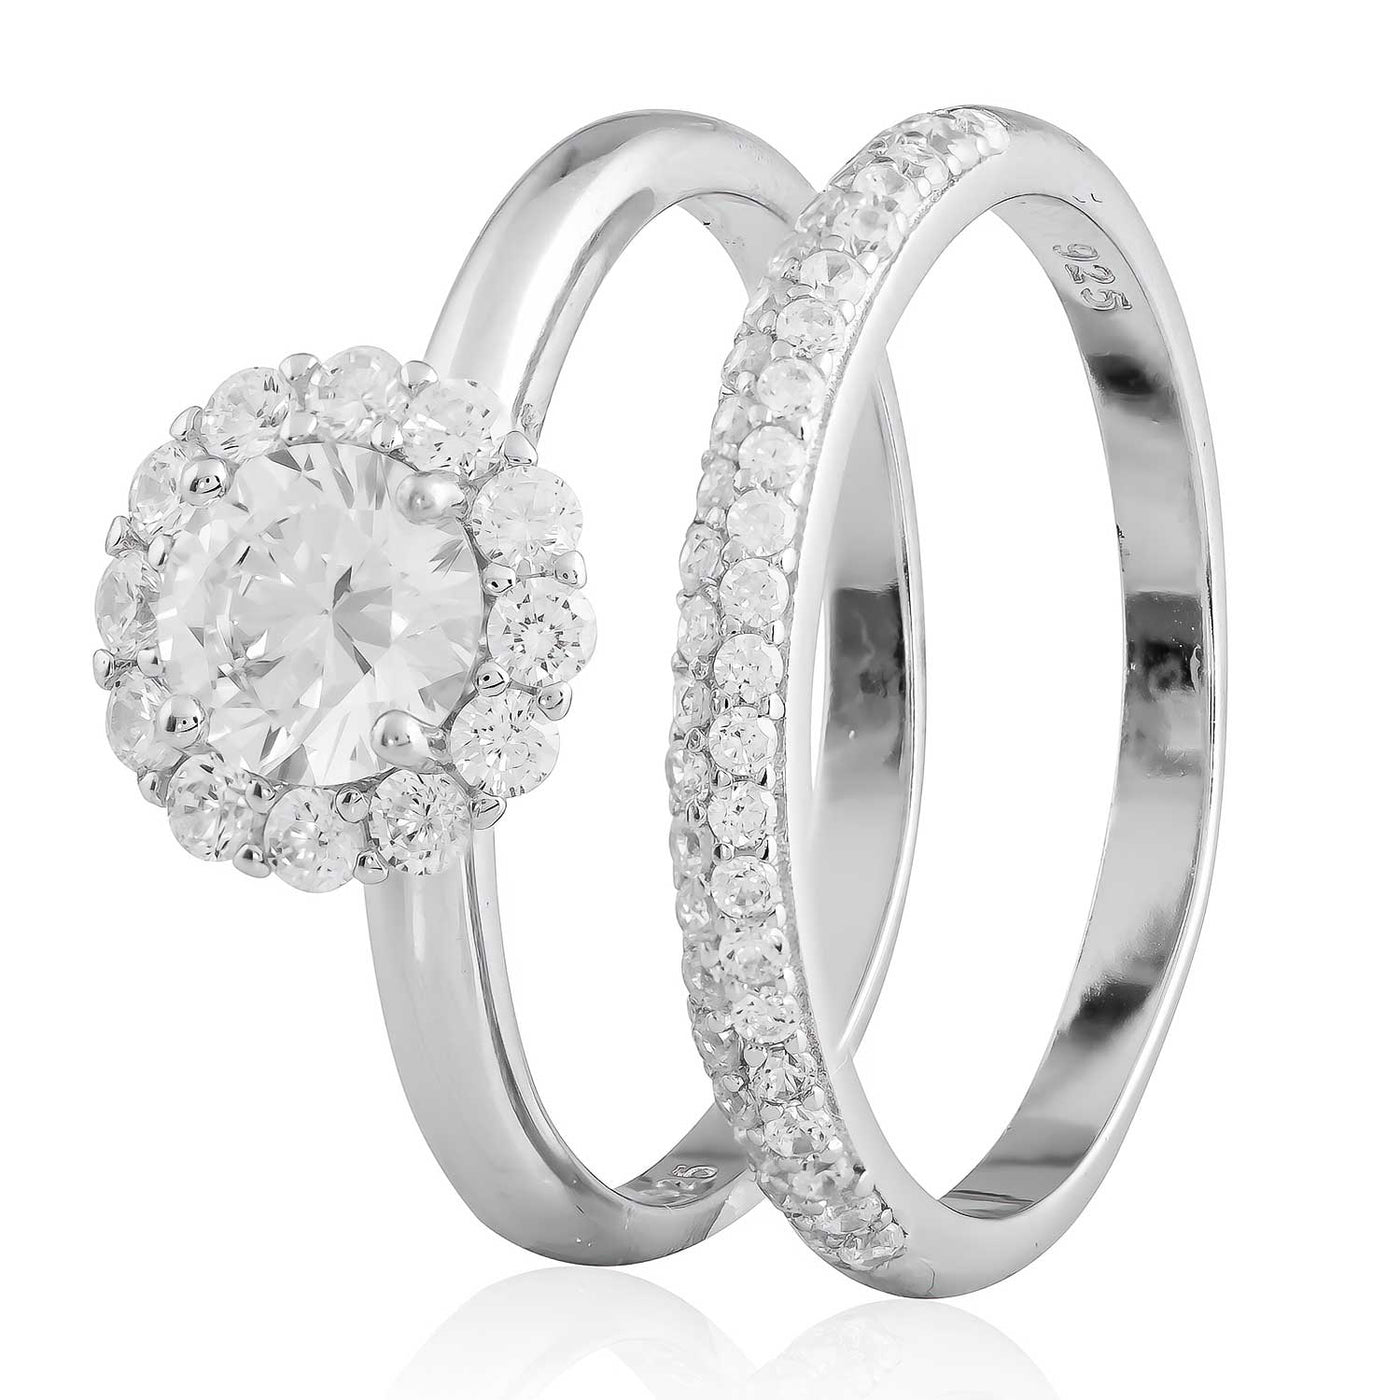 Rhodium Plated Sterling Silver CZ Engagement Ring Set. The product sku is R322.